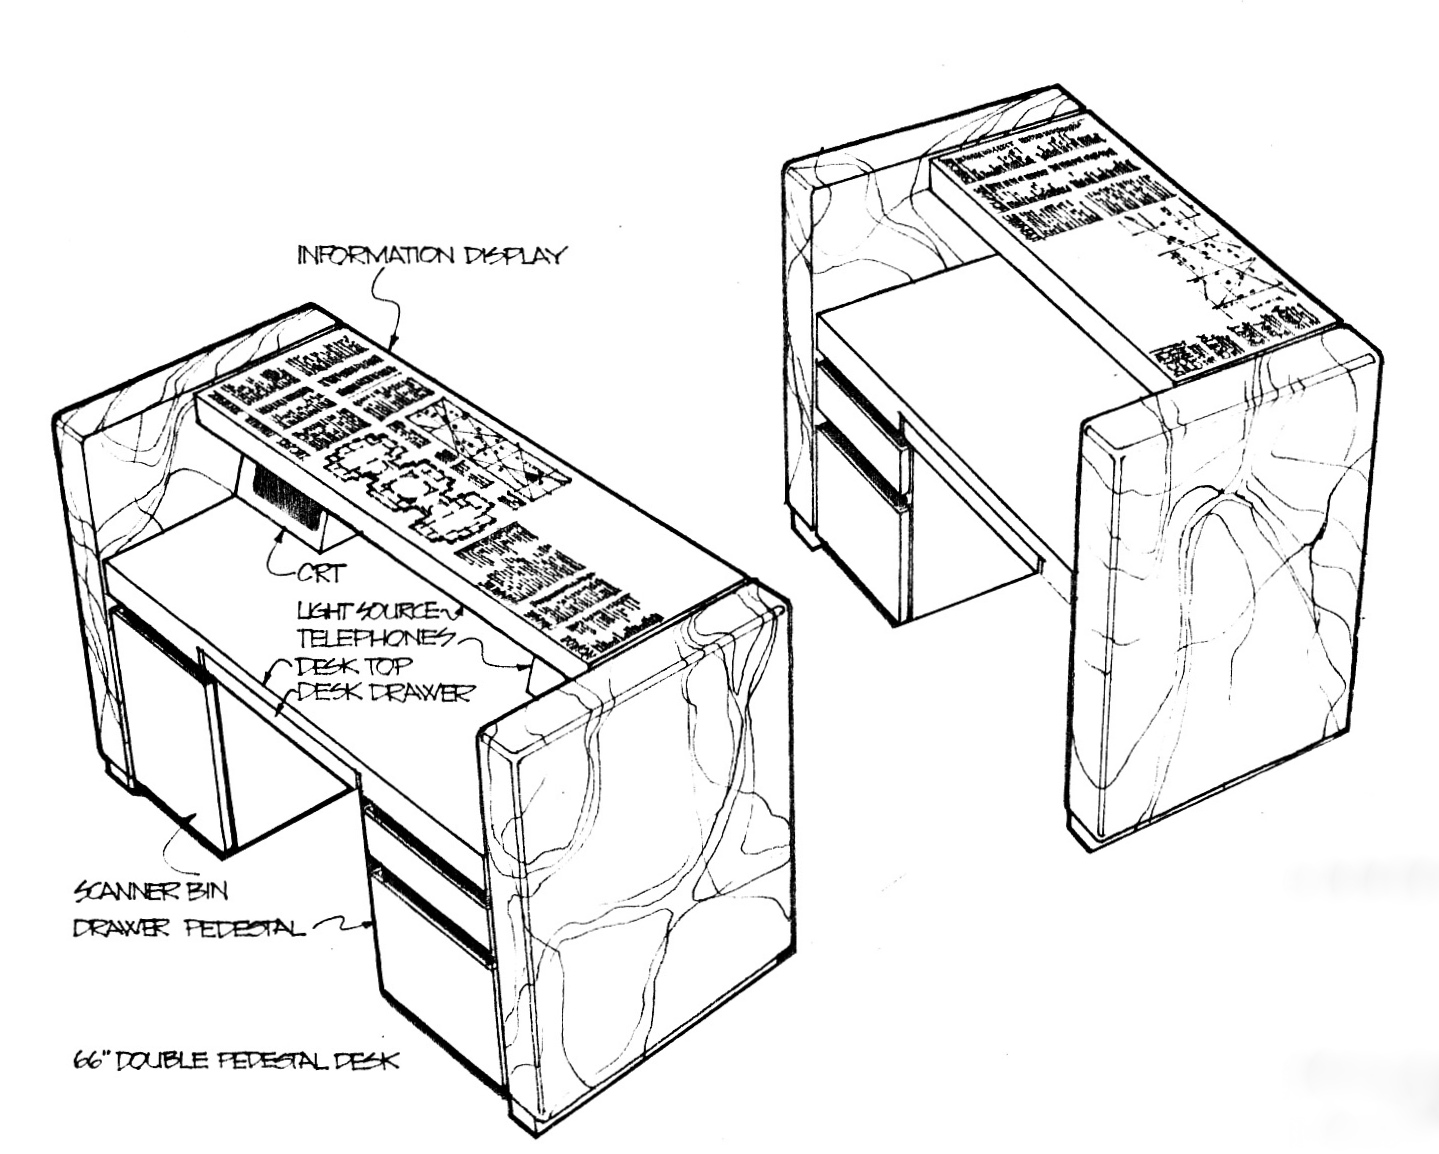 Diagrams of the reverse sides of the main security desk